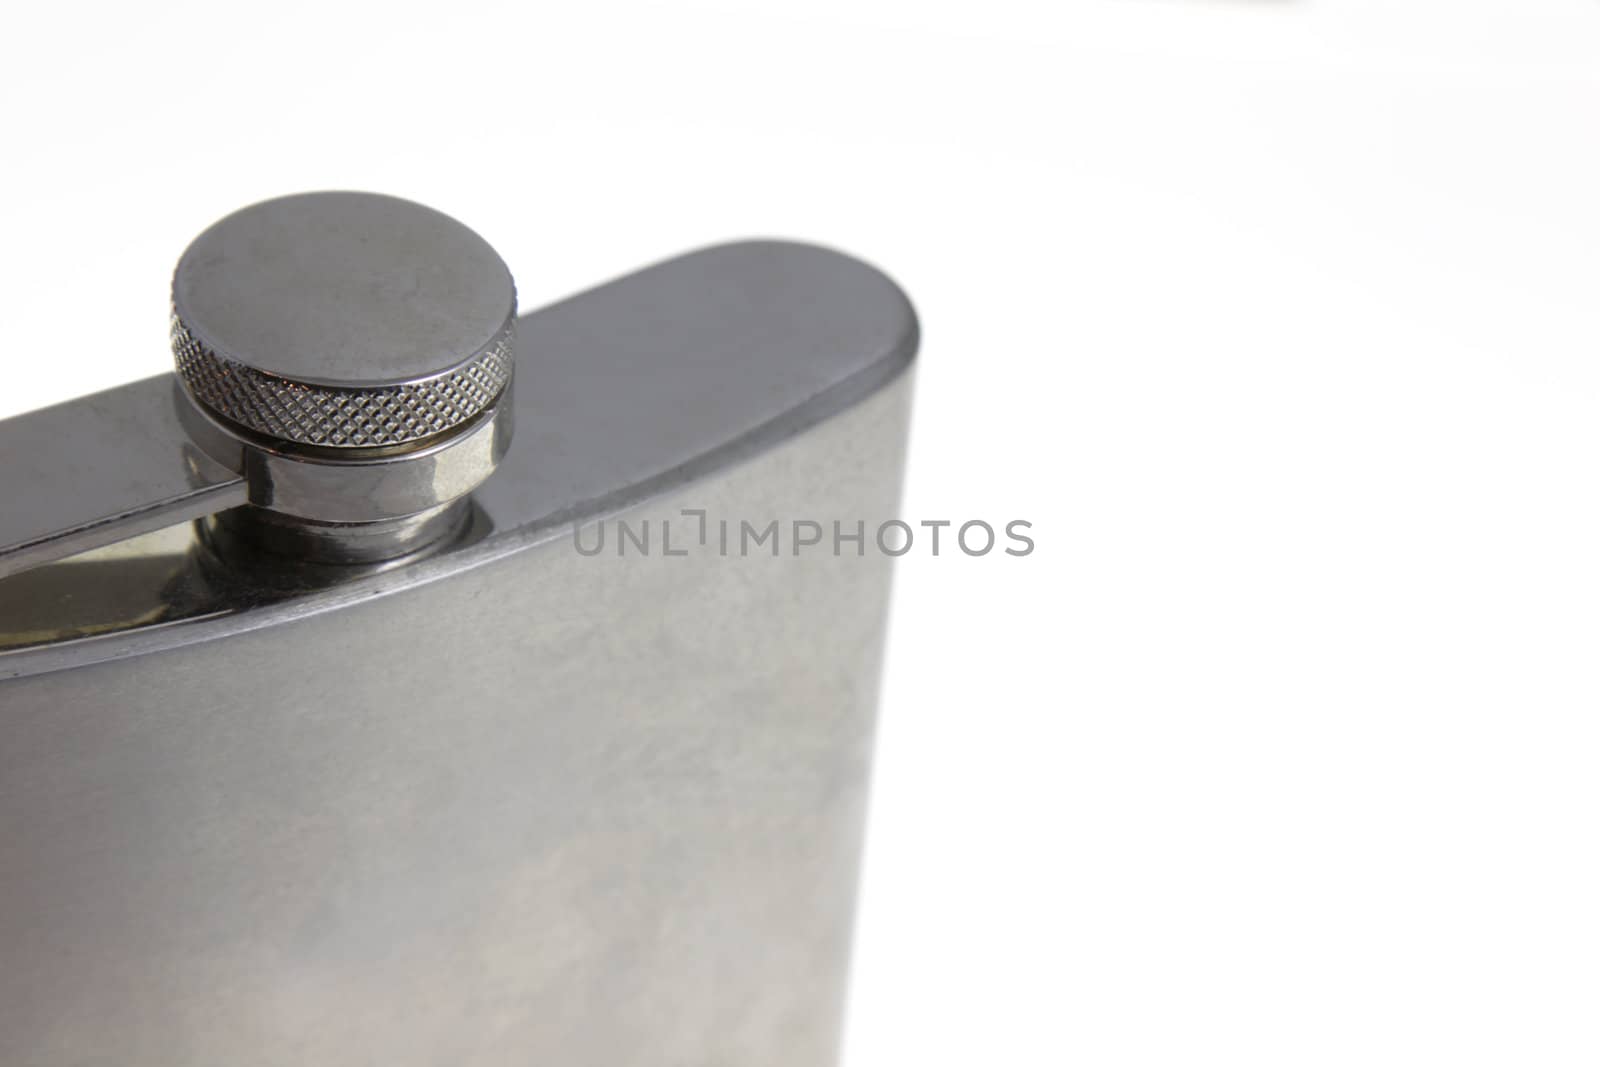 A close up of a metal flask.
